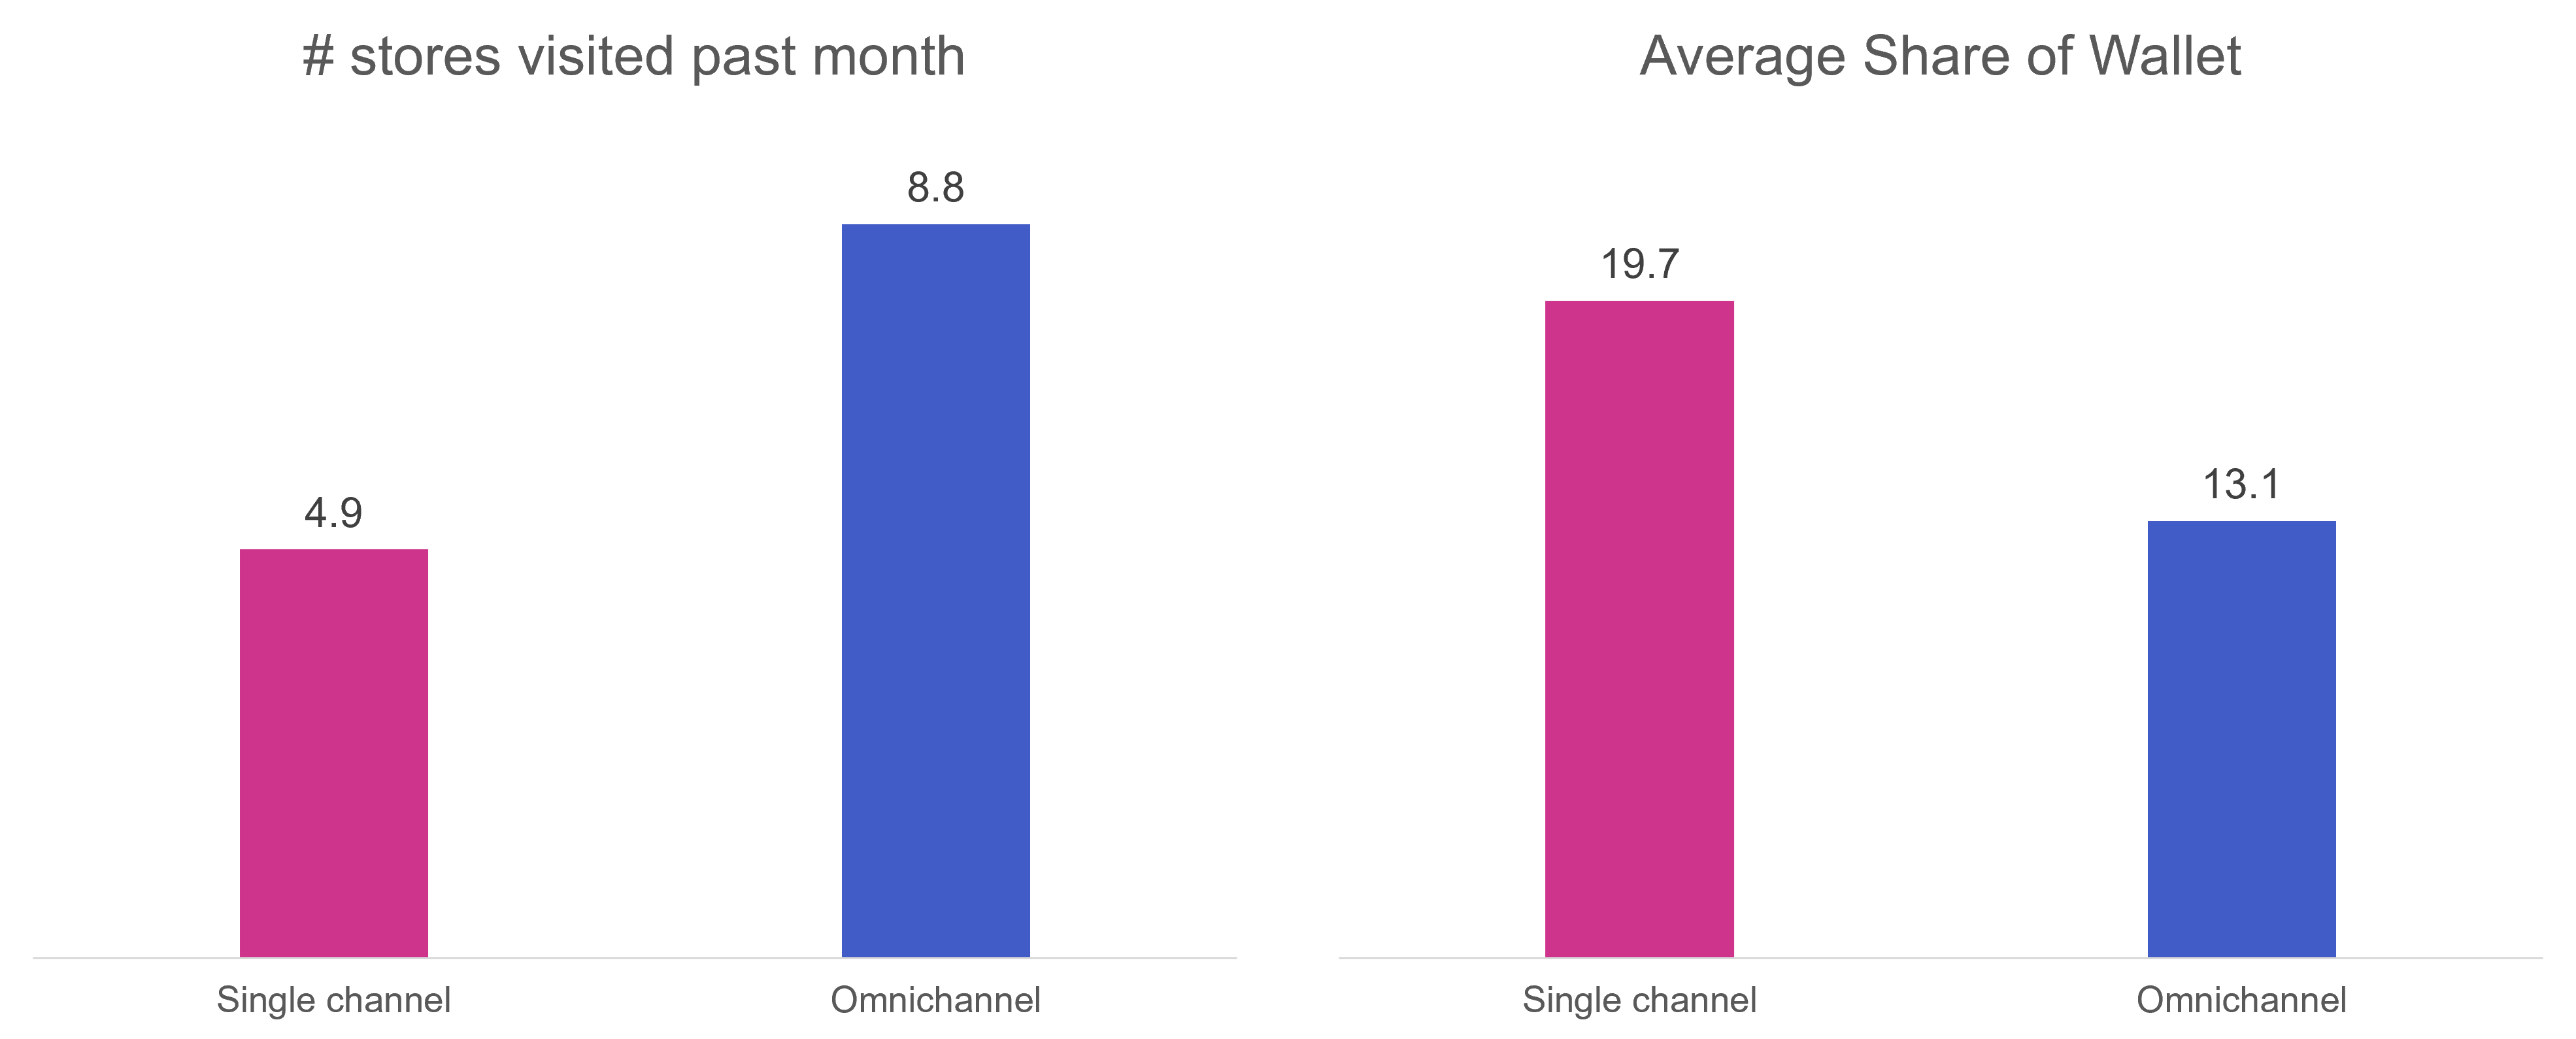 Single channel vs Omnichannel - Stores visits and average share of wallet